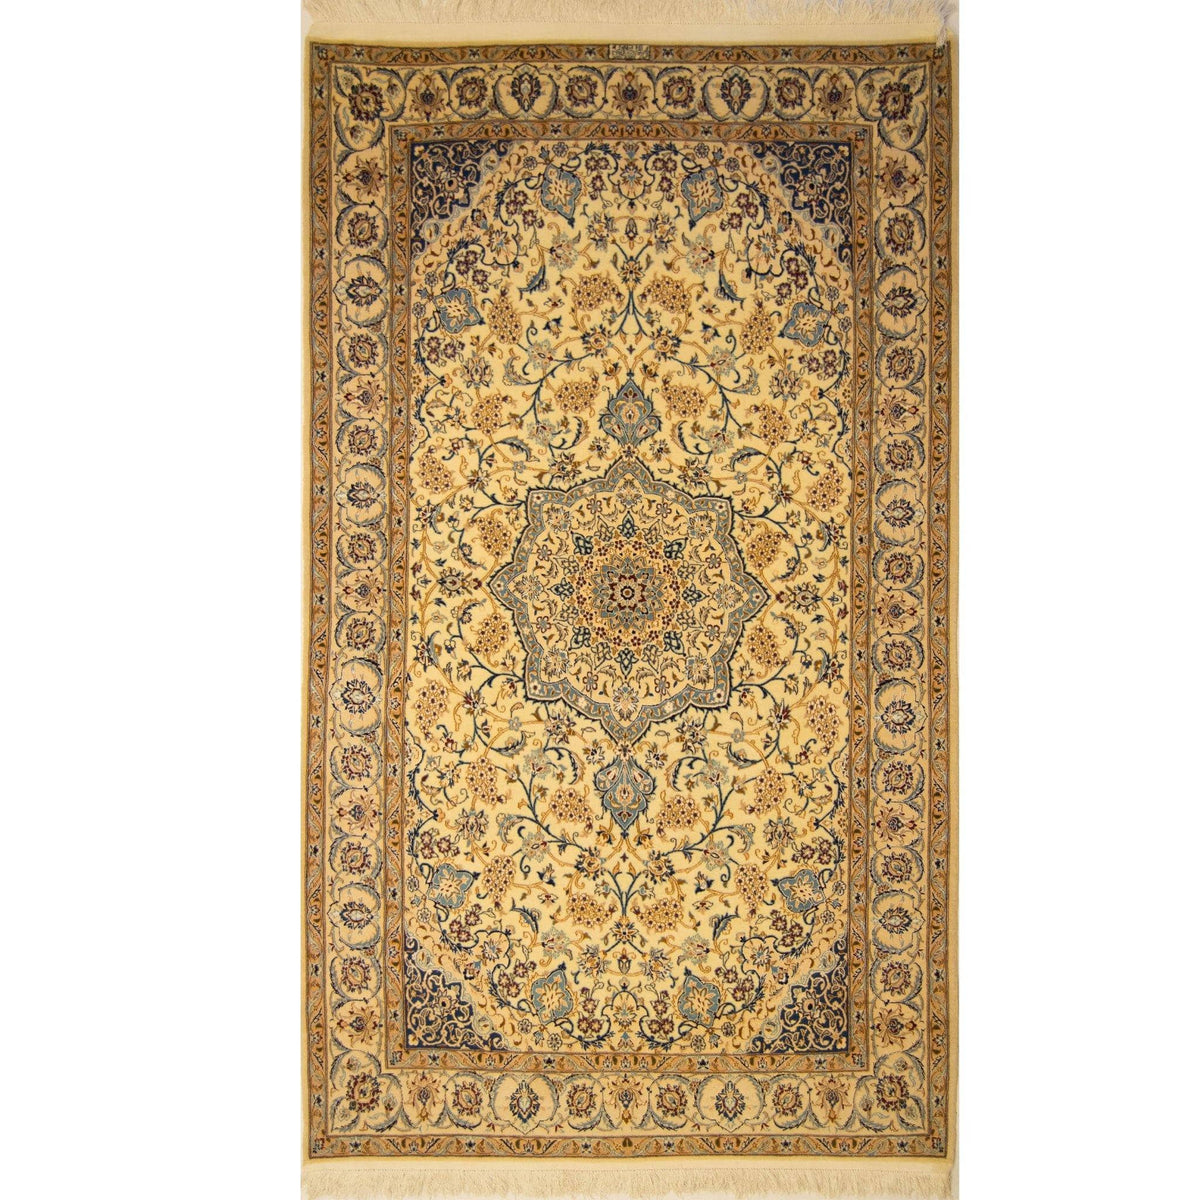 Super Fine Hand-knotted 3LAA Nain Persian Wool &amp; Silk Rug ( SIGNED HABIBIAN )137cm x 235cm